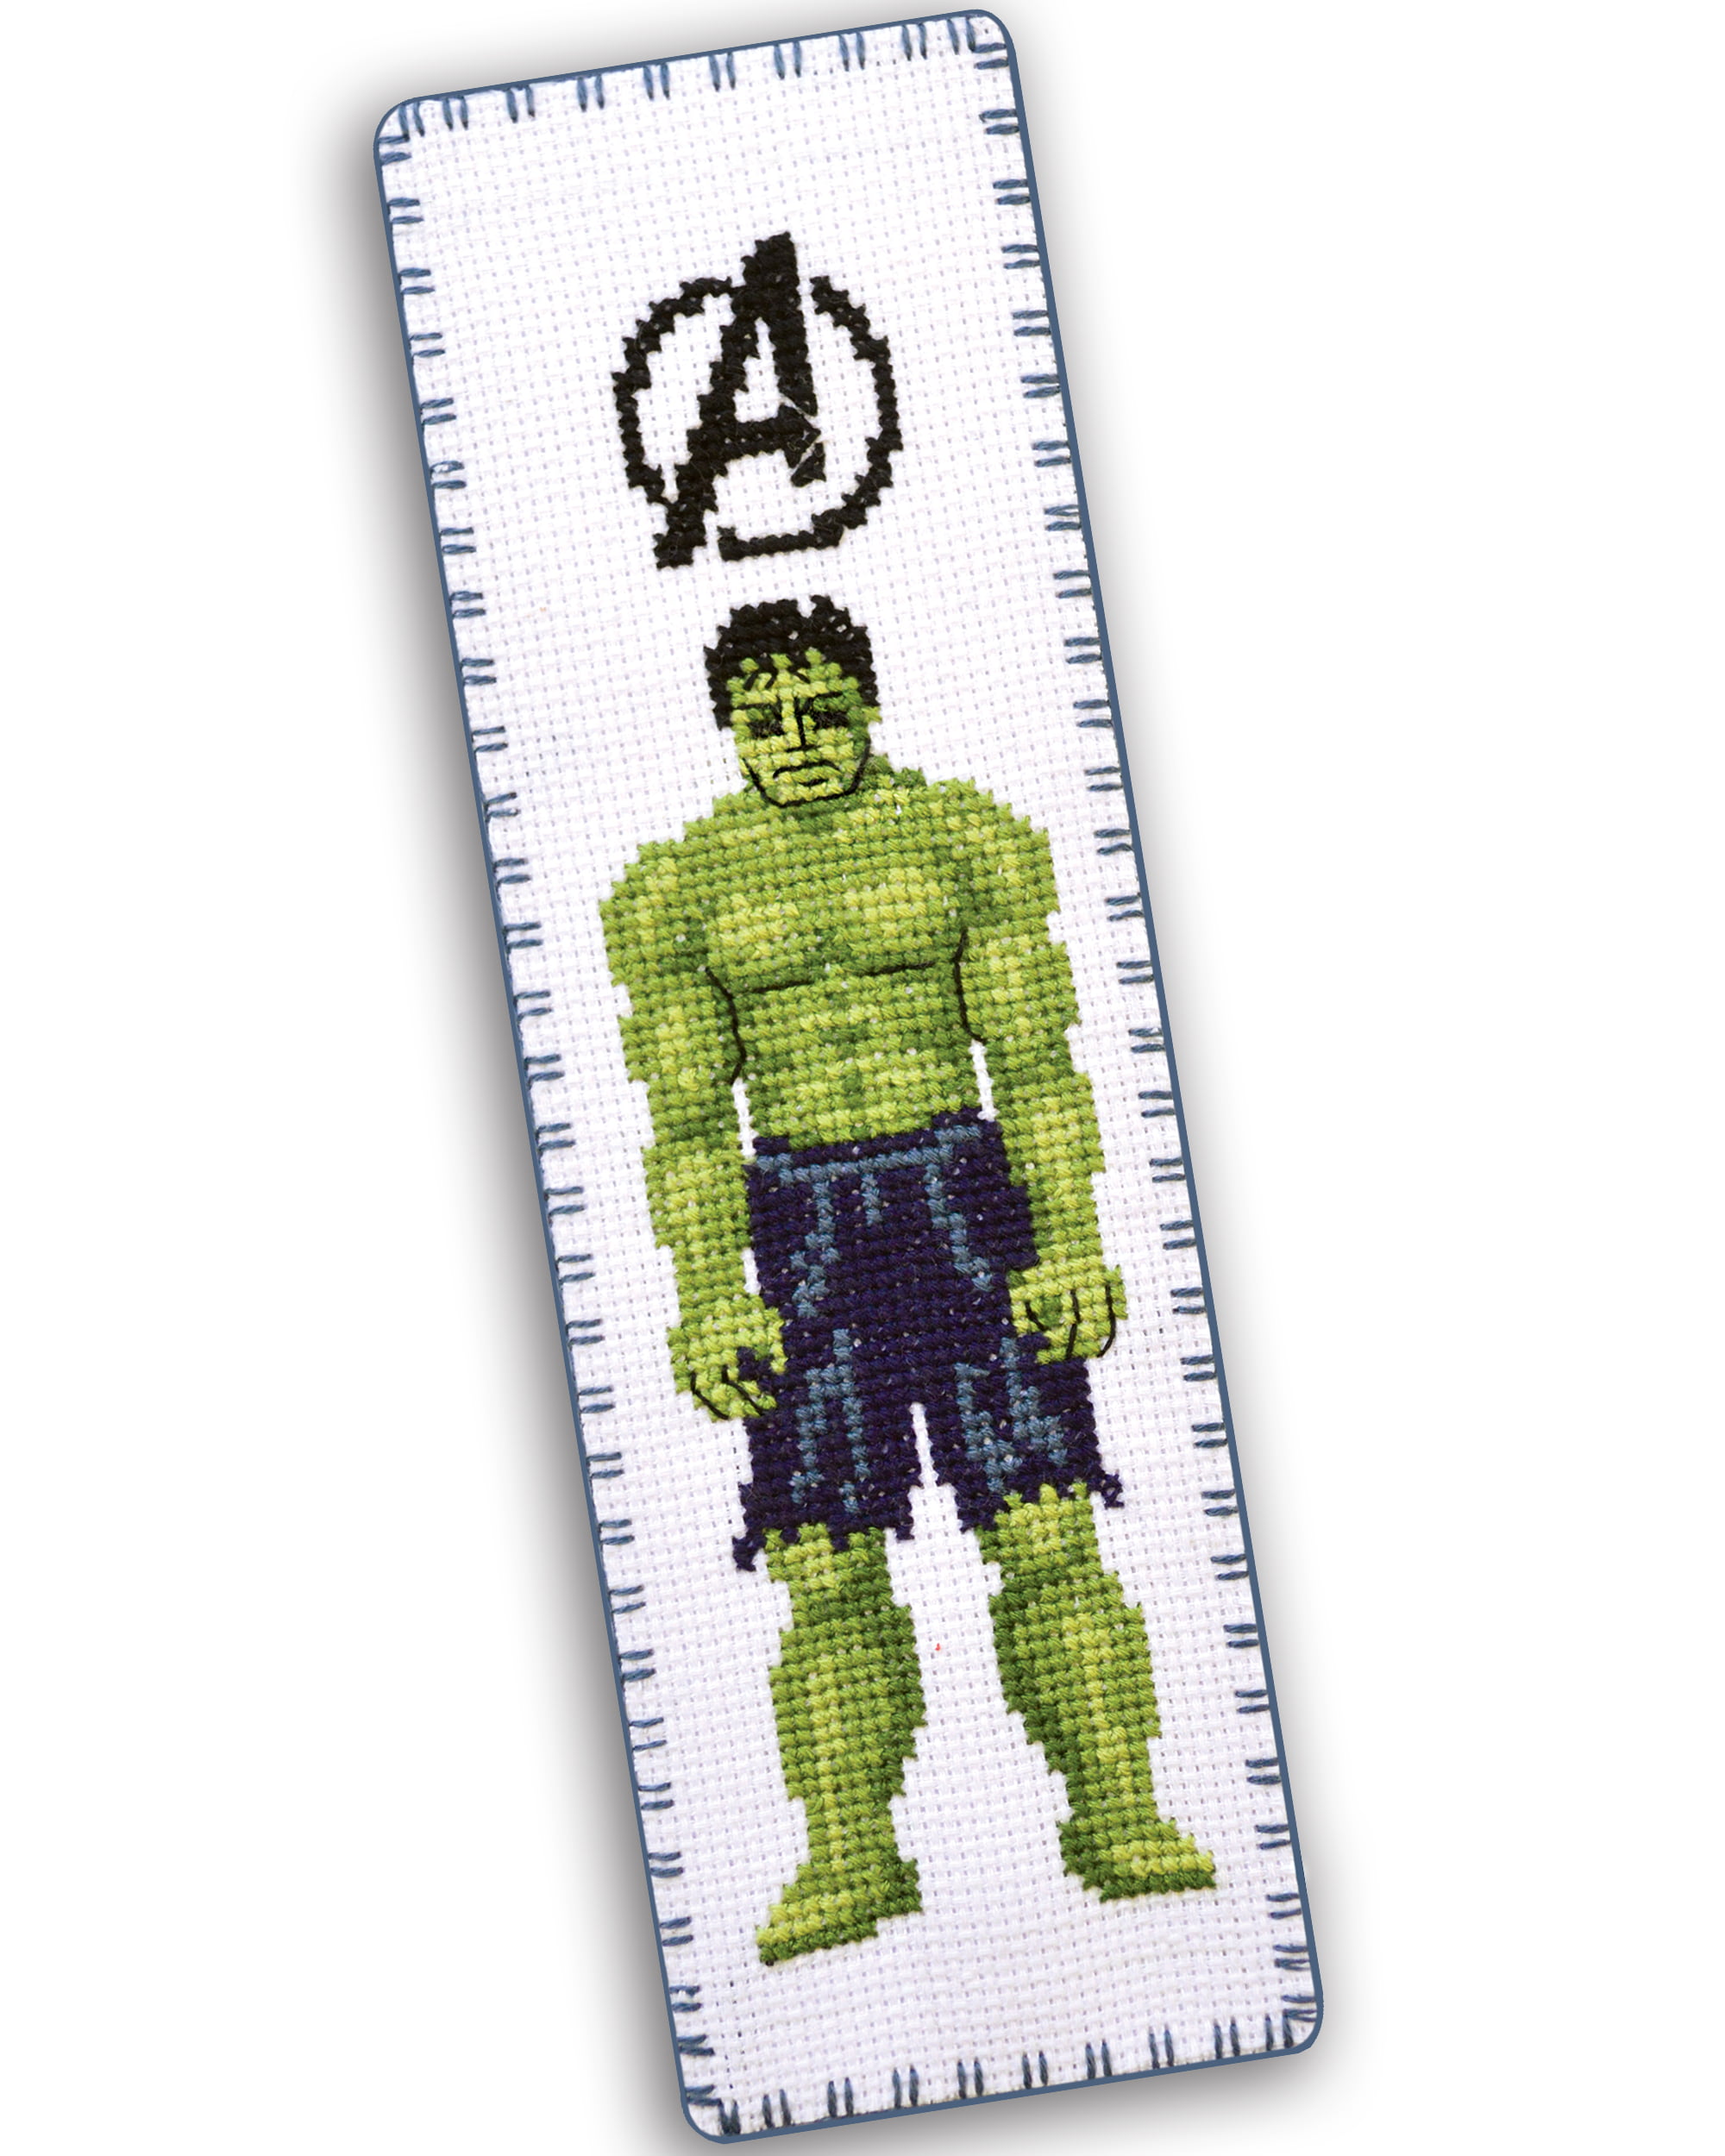 counted cross stitch kit the avengers hulk marvel hand embroidery